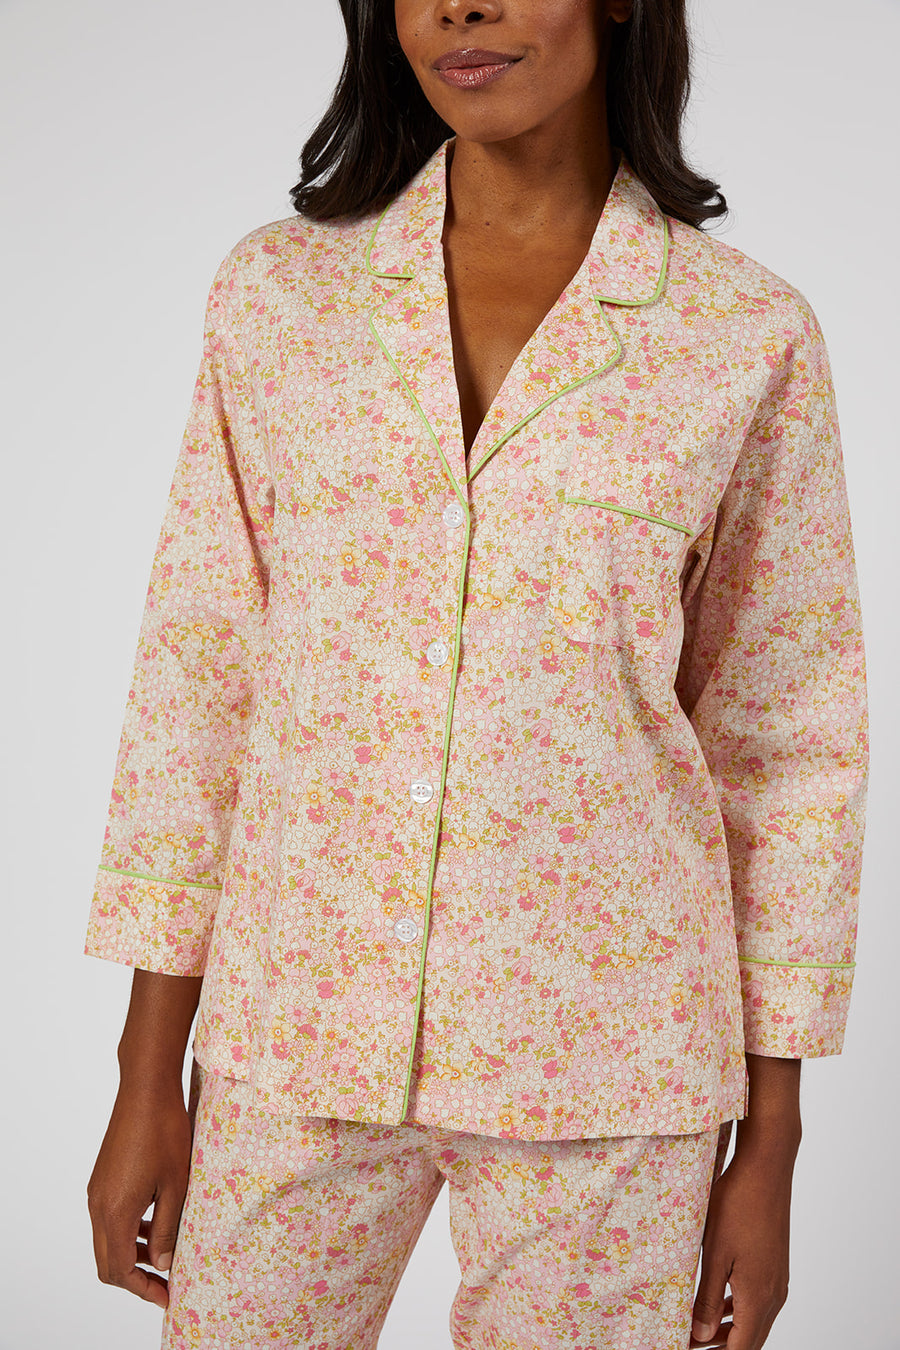 CLASSIC COTTON PAJAMAS IN PINK LIBERTY FLORAL - Lenora